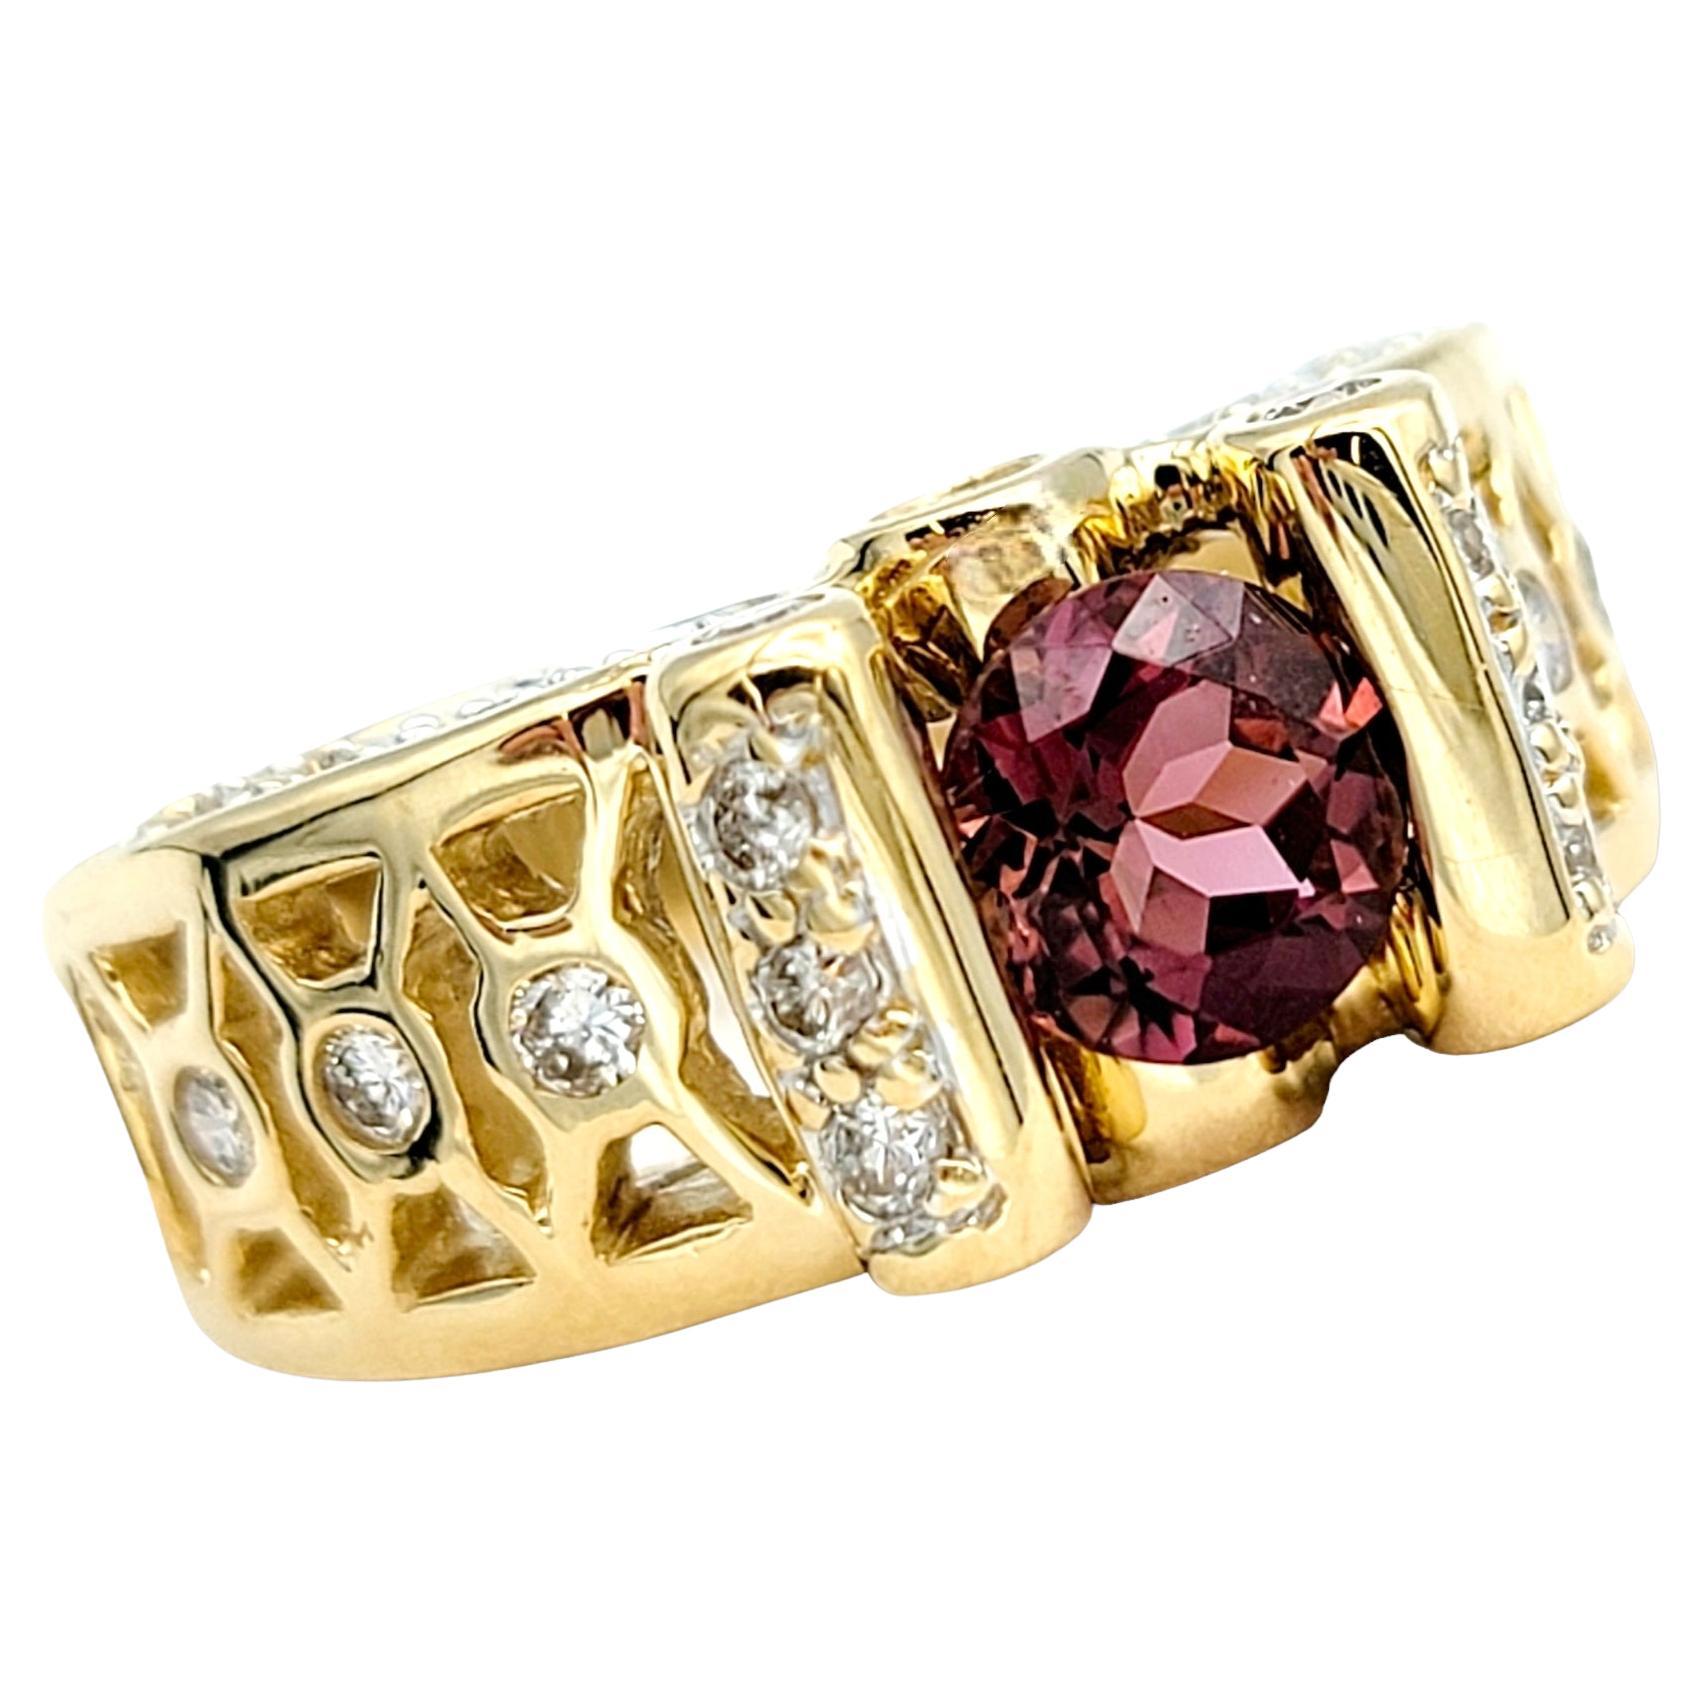 Ring size: 6 

This exquisite ring is a stunning embodiment of timeless elegance and contemporary design. Crafted from lustrous 14 karat yellow gold, it showcases a mesmerizing tension set red round tourmaline as its centerpiece. The tension setting